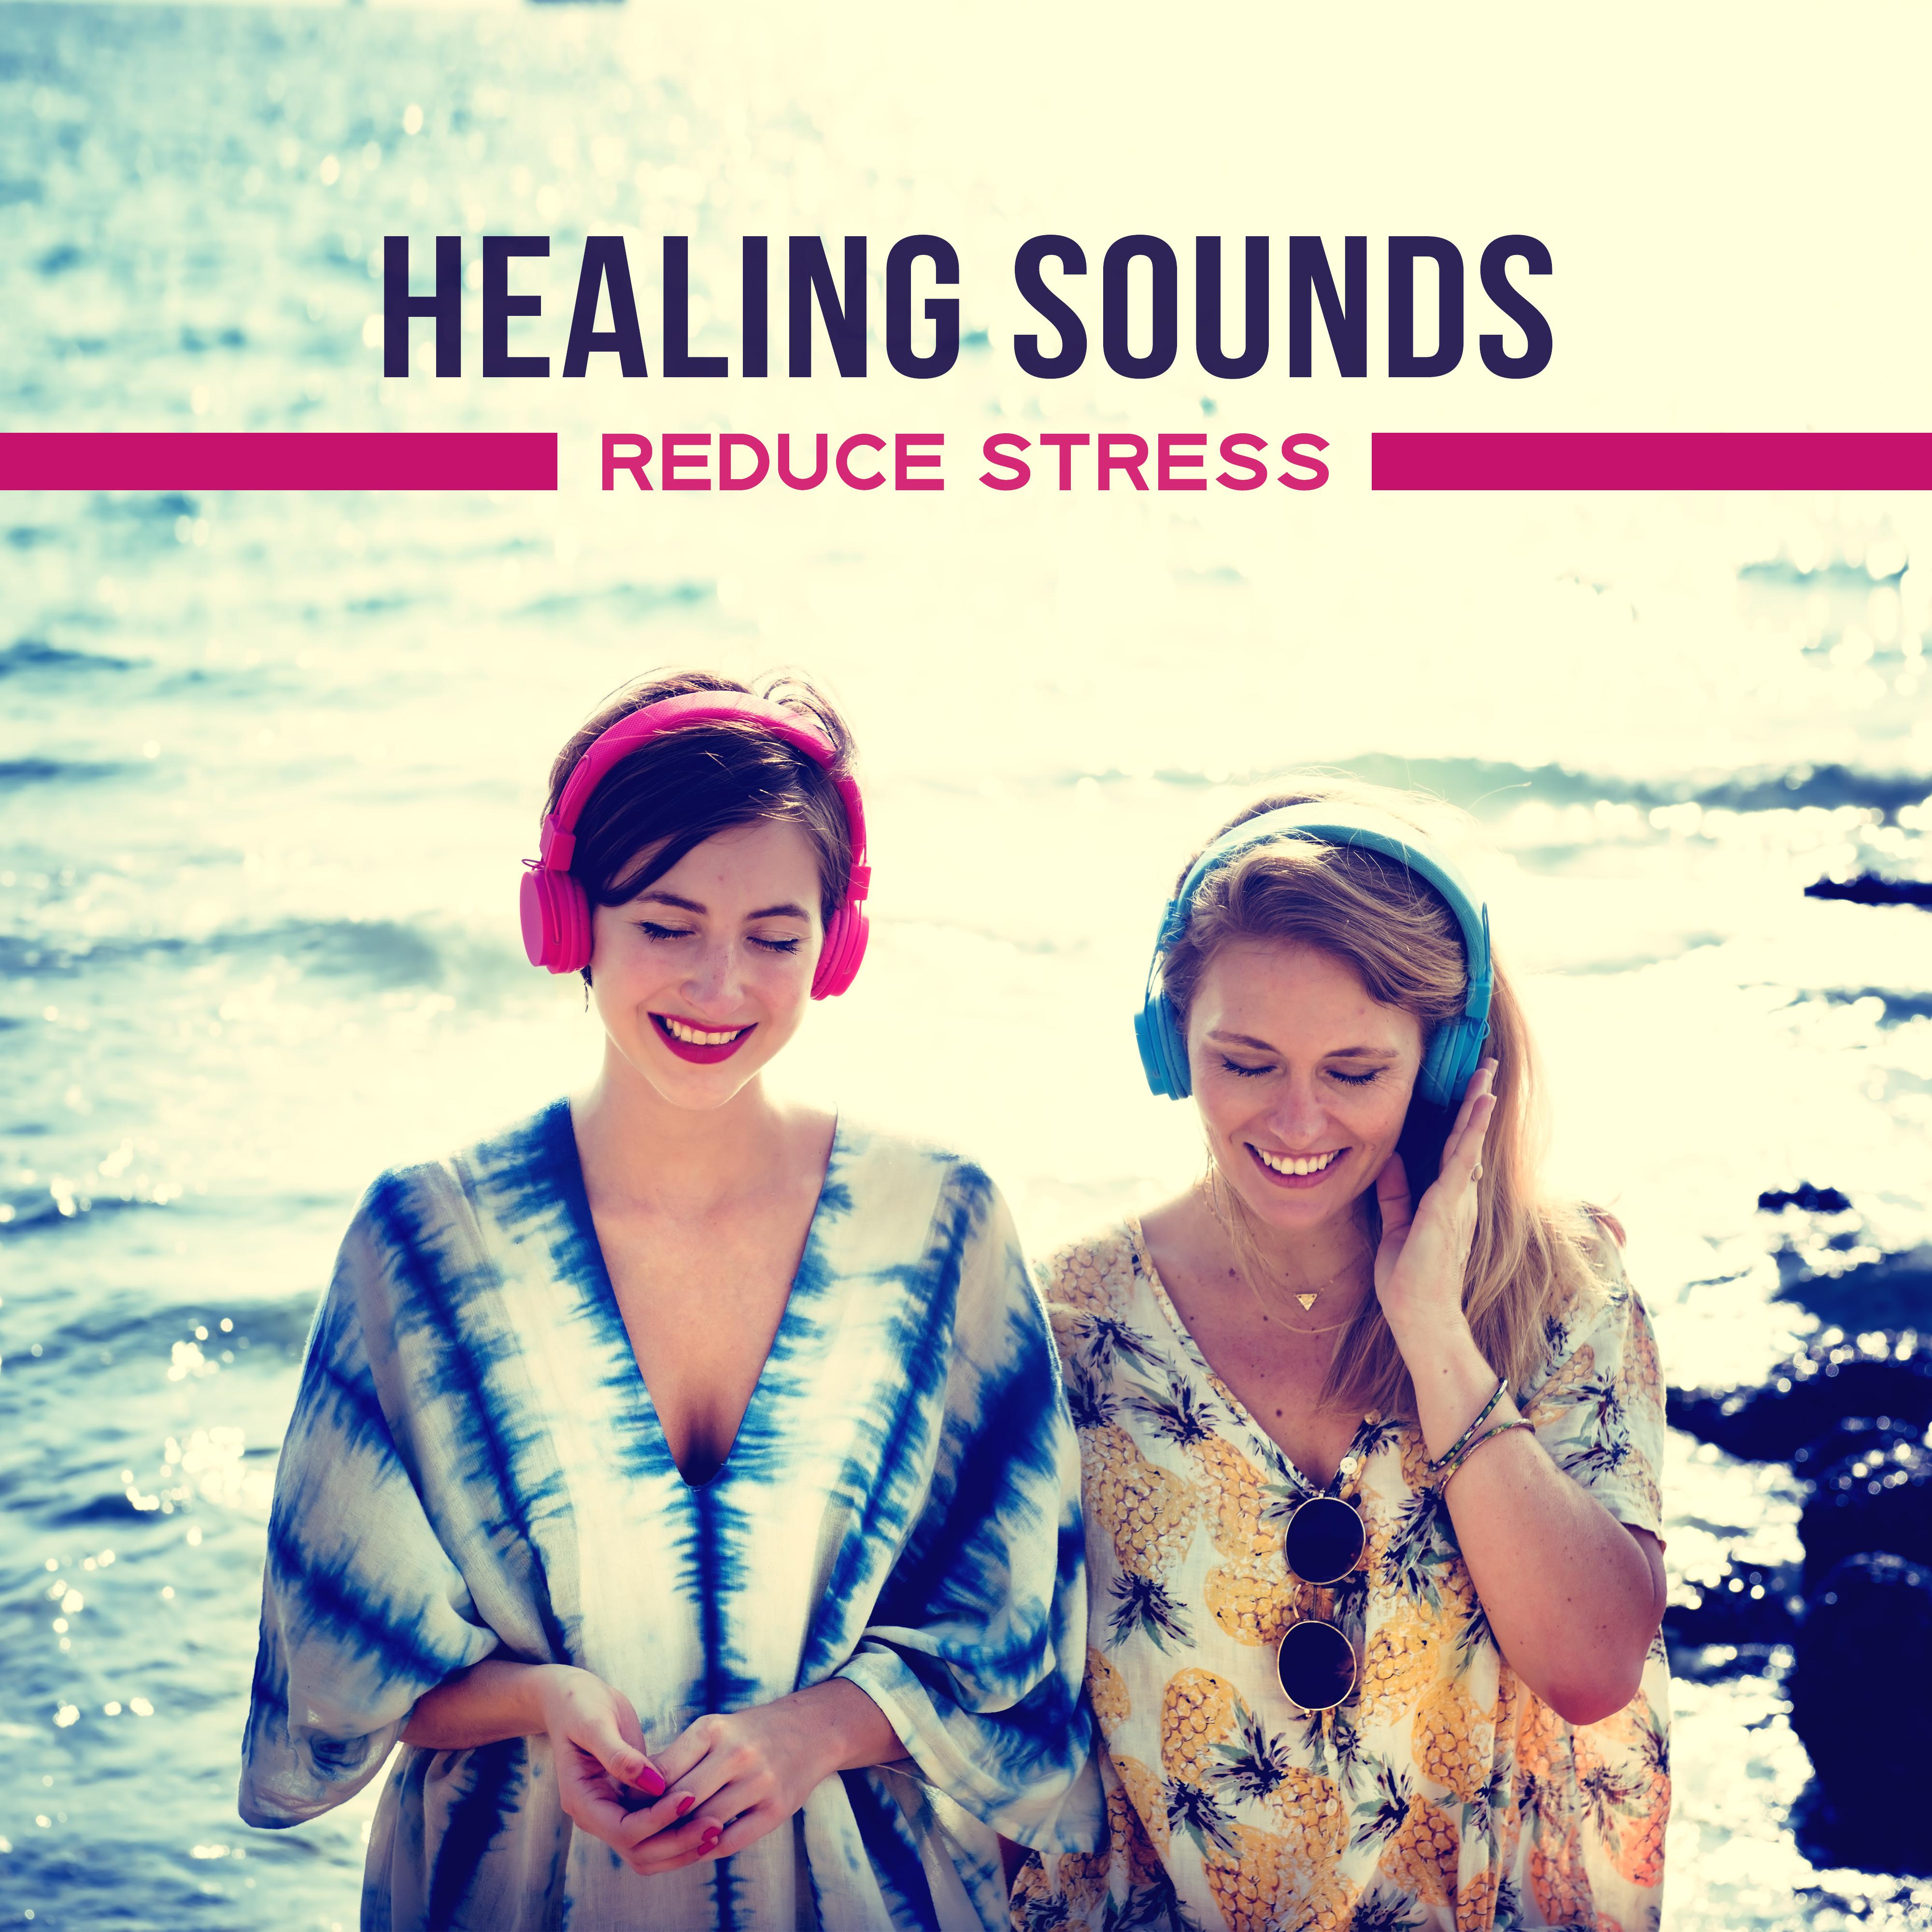 Healing Sounds Reduce Stress – Music to Calm Down, Relaxing Therapy, Harmony, Peaceful Mind, New Age Music to Rest, Chillout, Zen